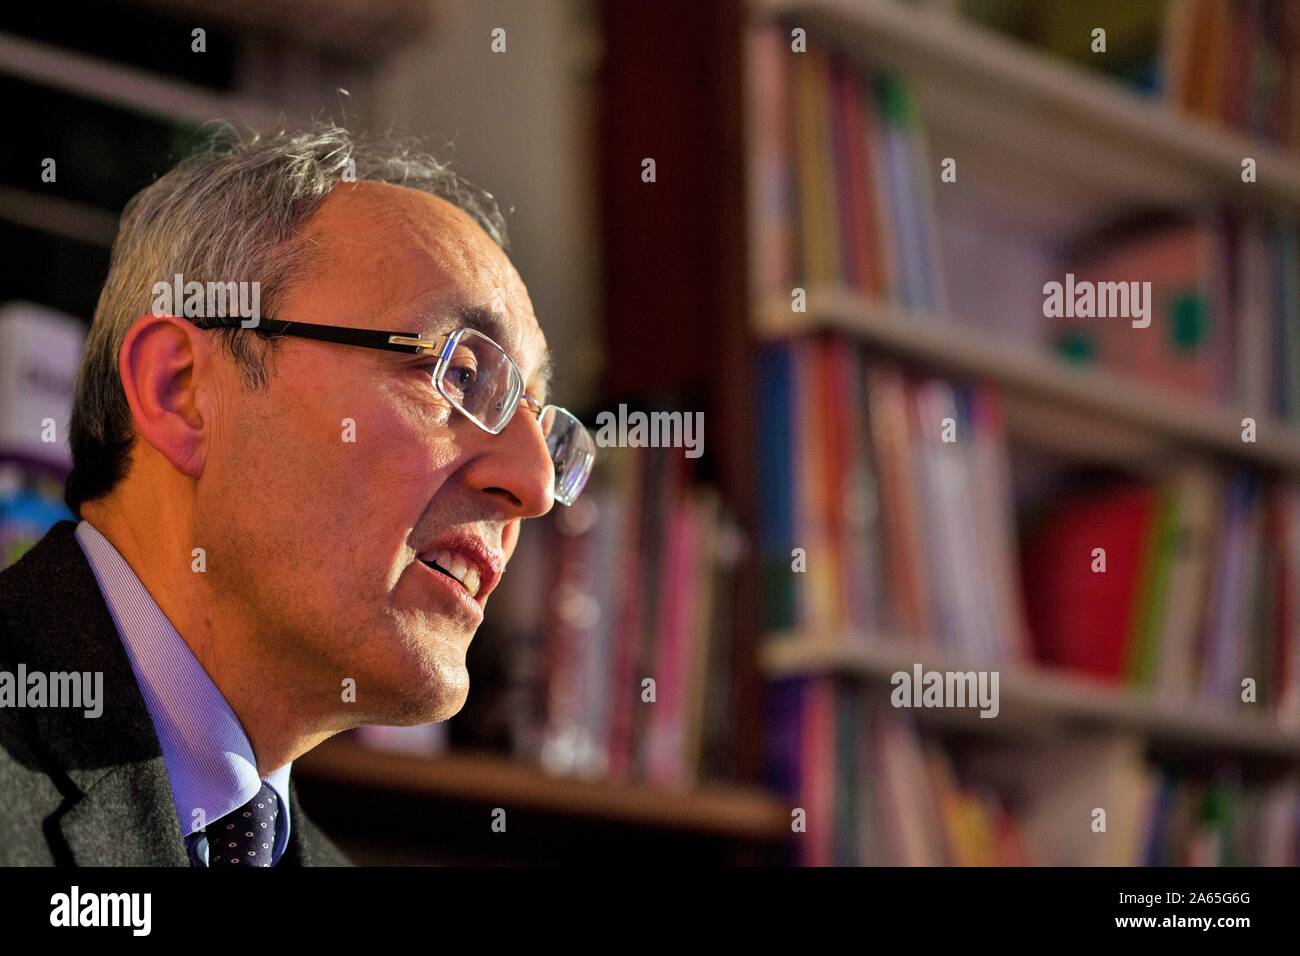 Dr Bernard Bigot, Chairman of the French Atomic Energy Commission Stock Photo